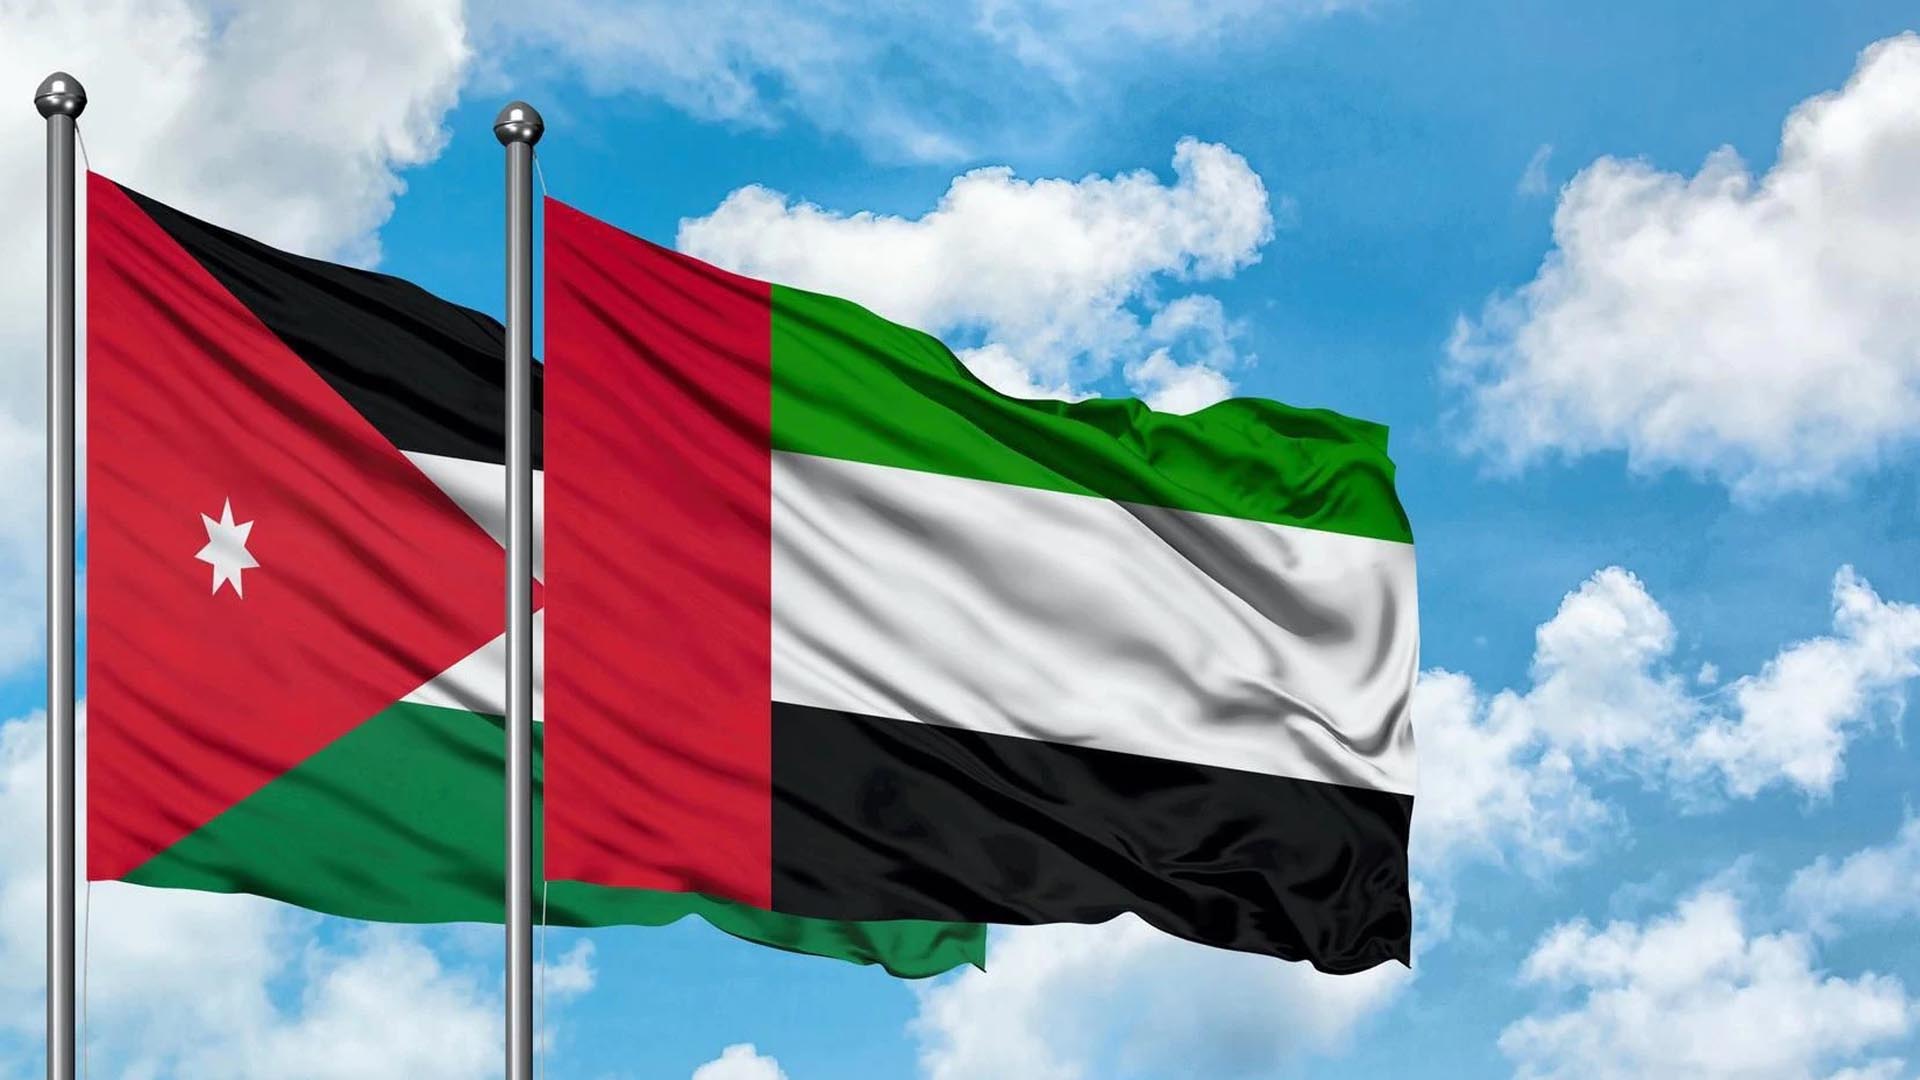 UAE signs MoU to explore gold and copper in Jordan